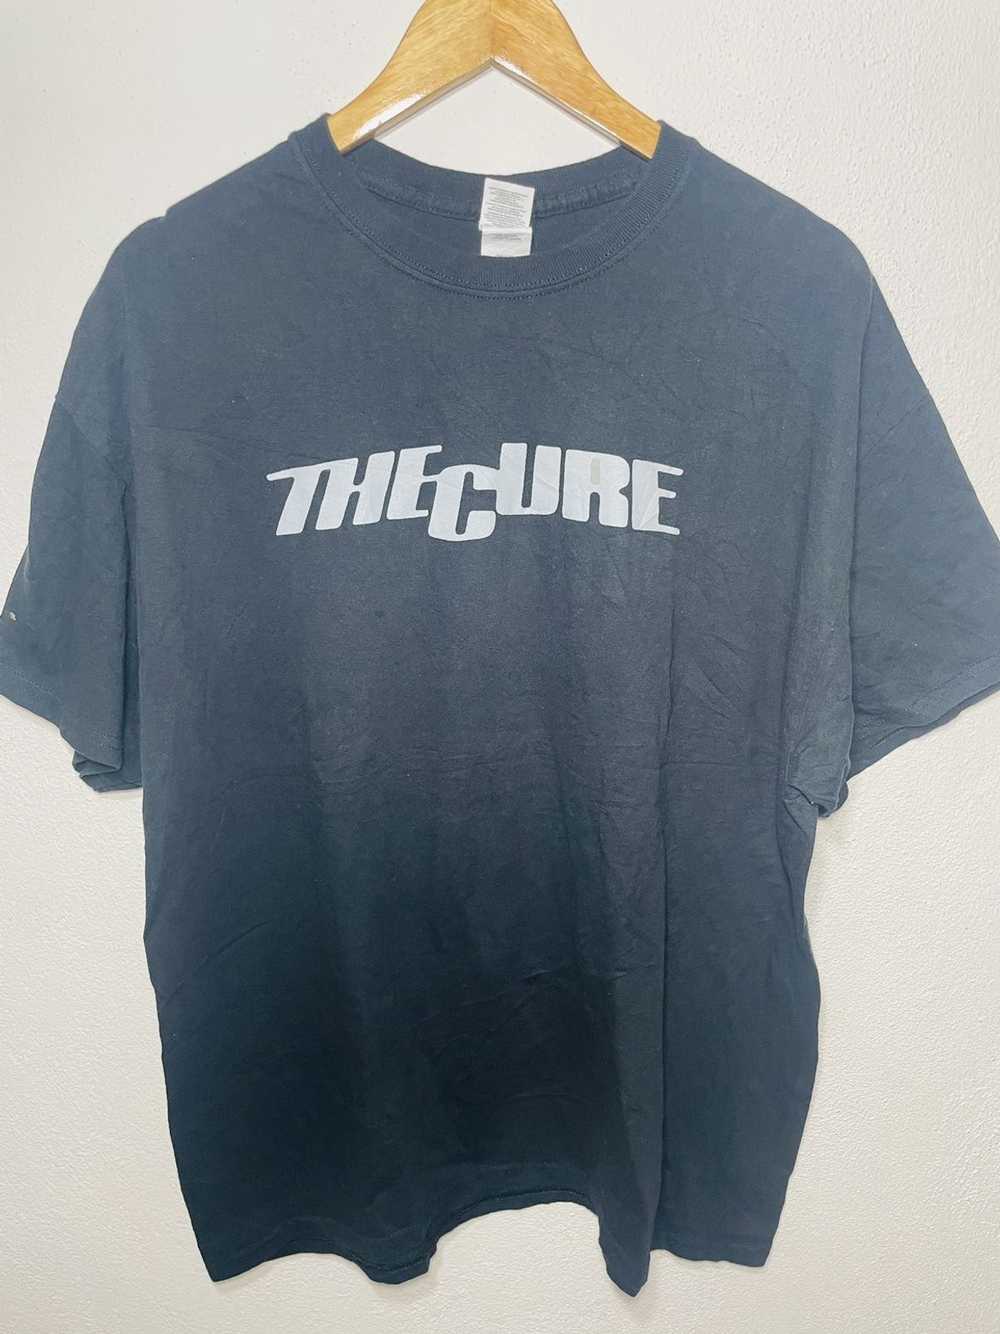 Band Tees × The Cure Rare!! The Cure Band T-Shirt… - image 4